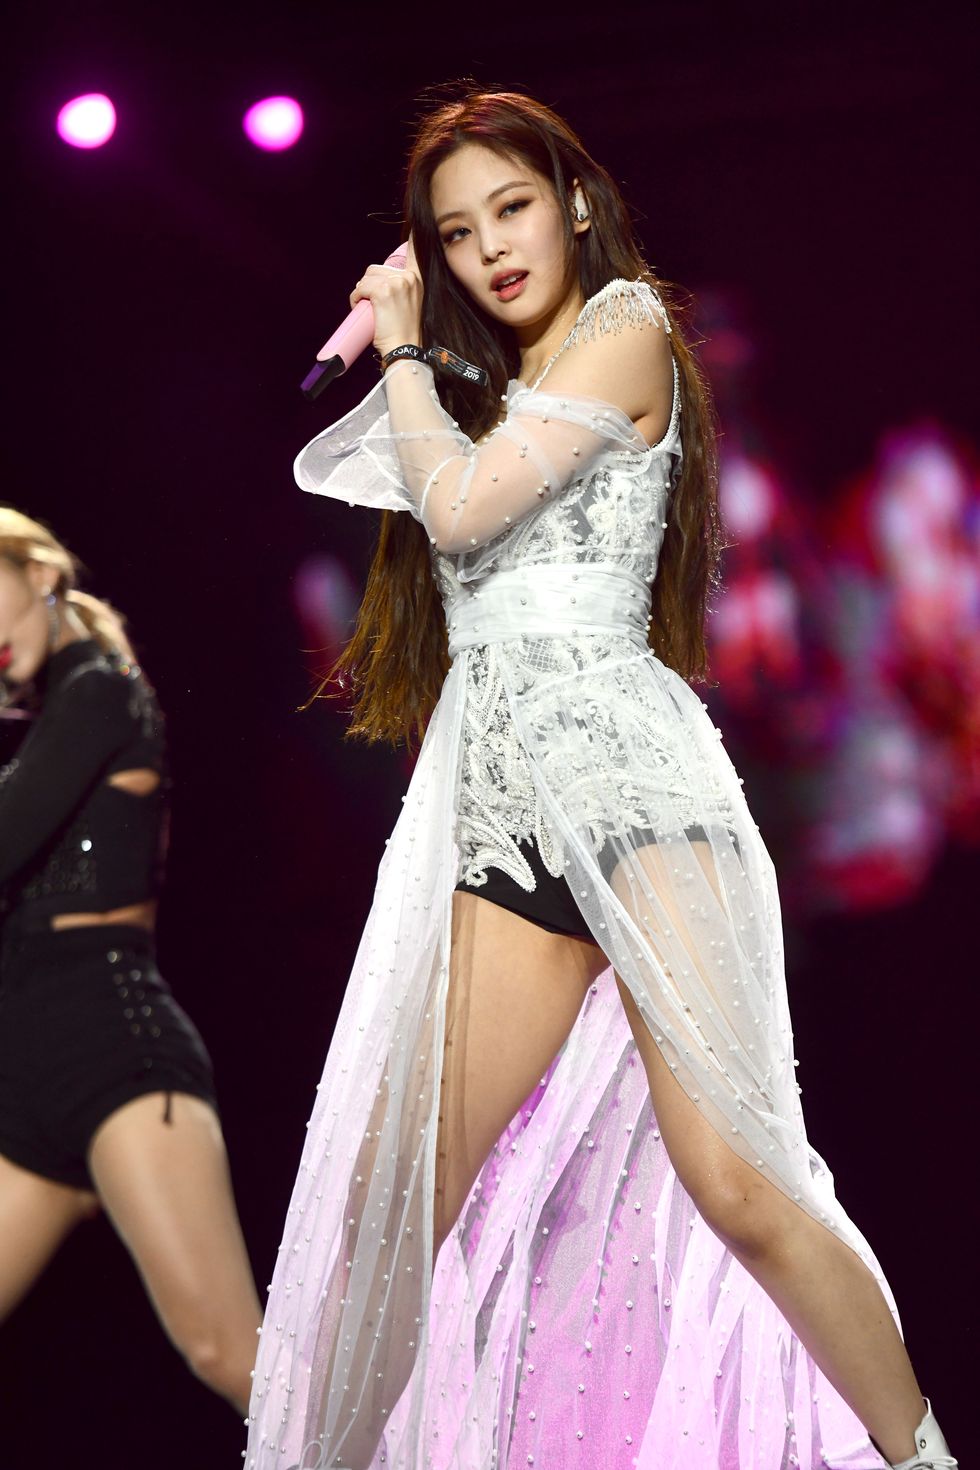 indio, california   april 12 singer jennie kim of blackpink performs onstage during the 2019 coachella valley music and arts festival on april 12, 2019 in indio, california photo by scott dudelsongetty images for coachella